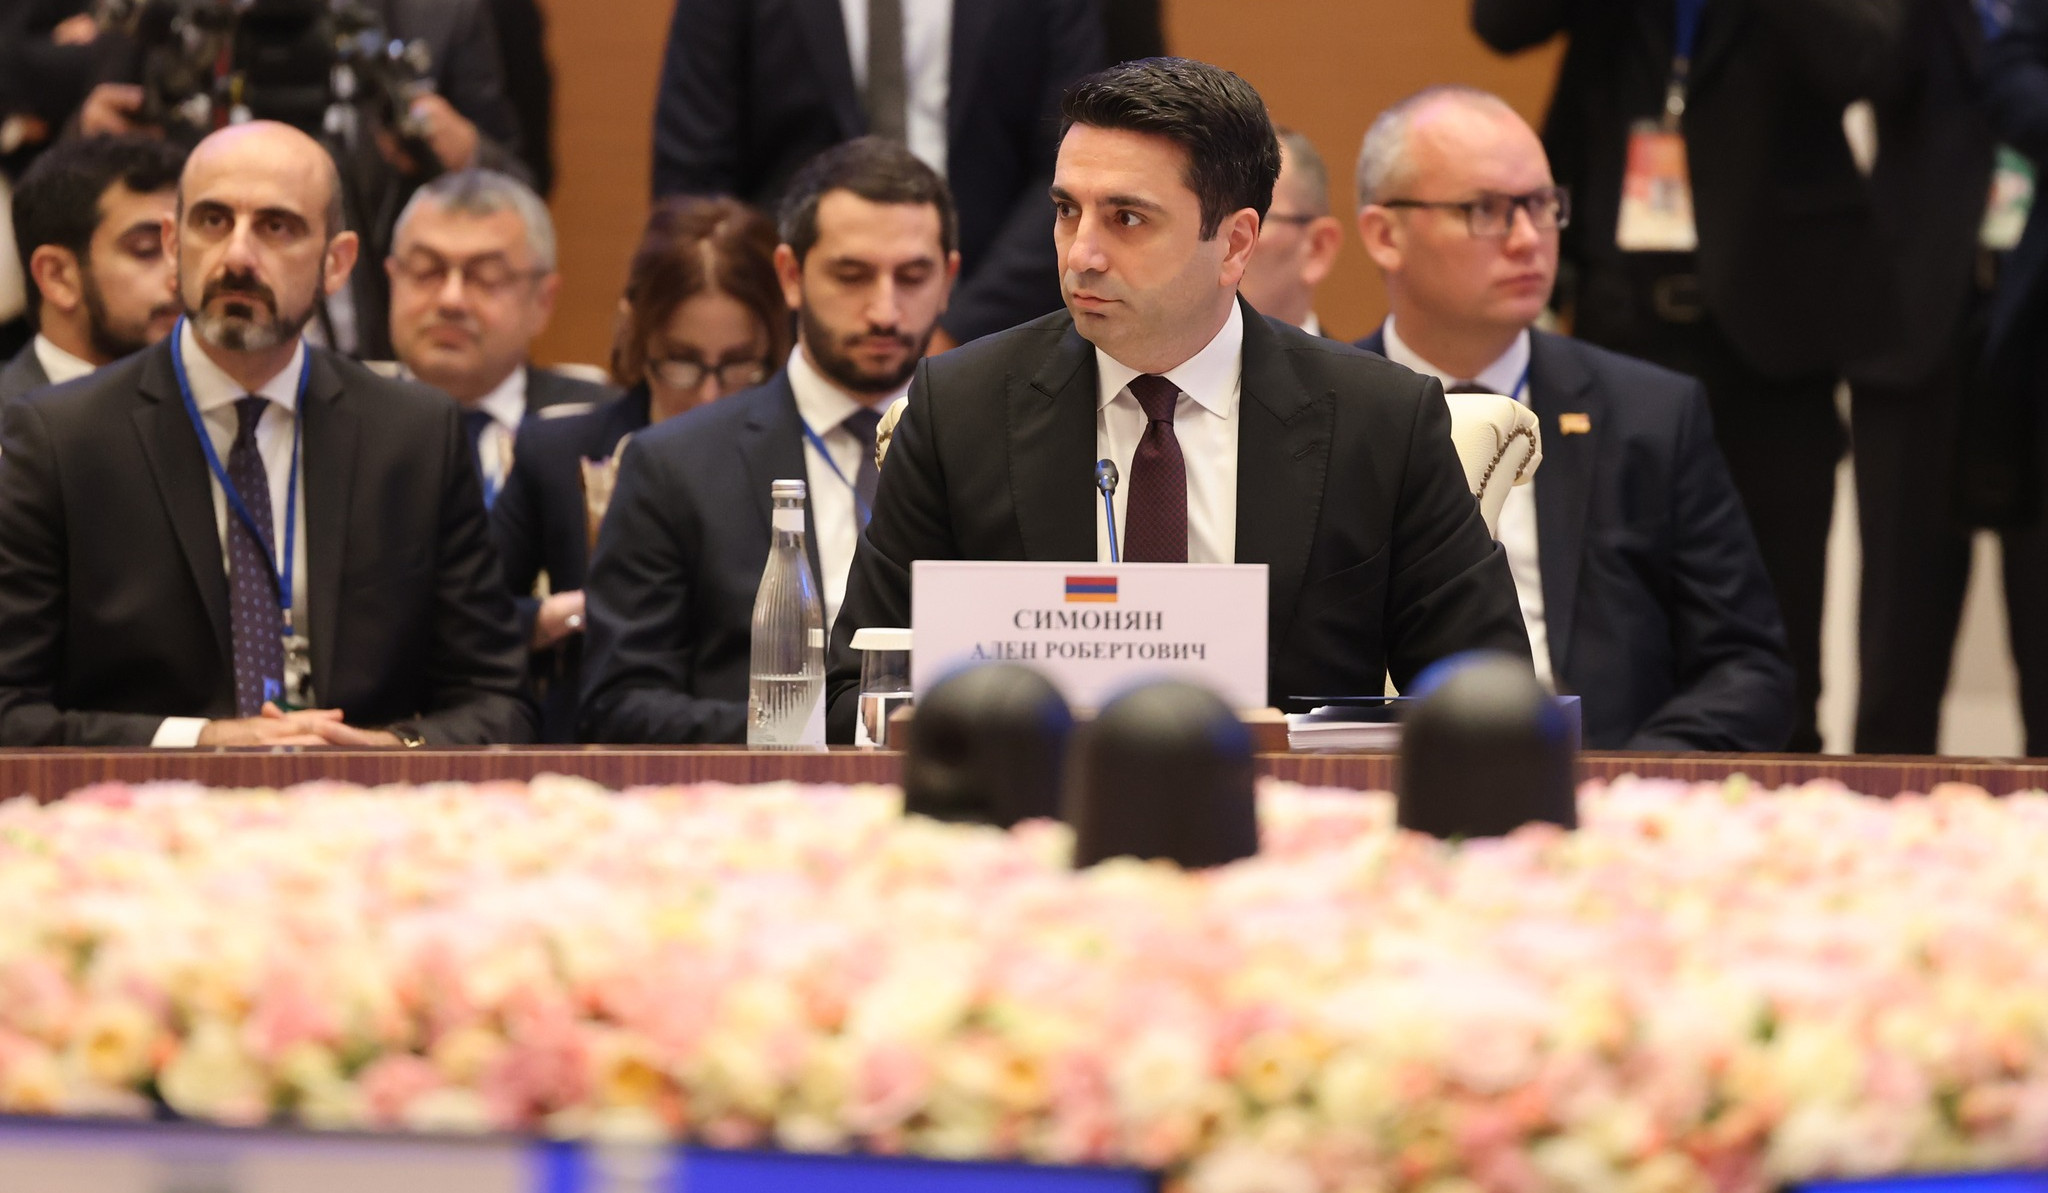 Alen Simonyan gives a speech at Plenary Session of Inter-parliamentary of CIS member states: policy of threats and coercion is unacceptable for us